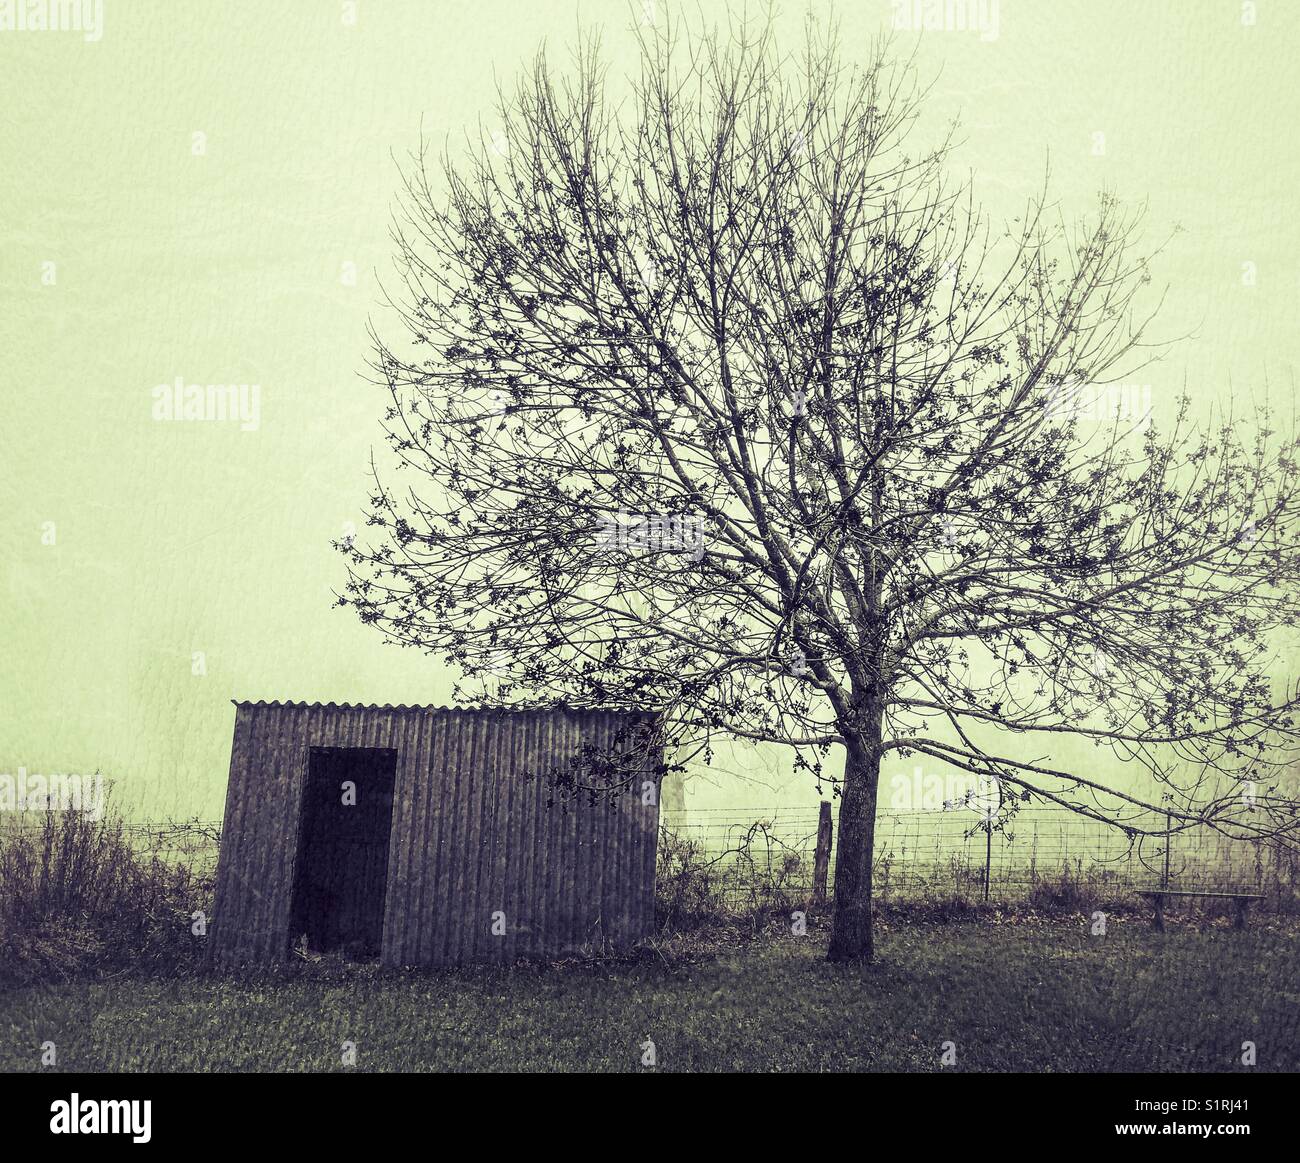 Creepy old metal slanted shed and tree with foggy background Stock Photo